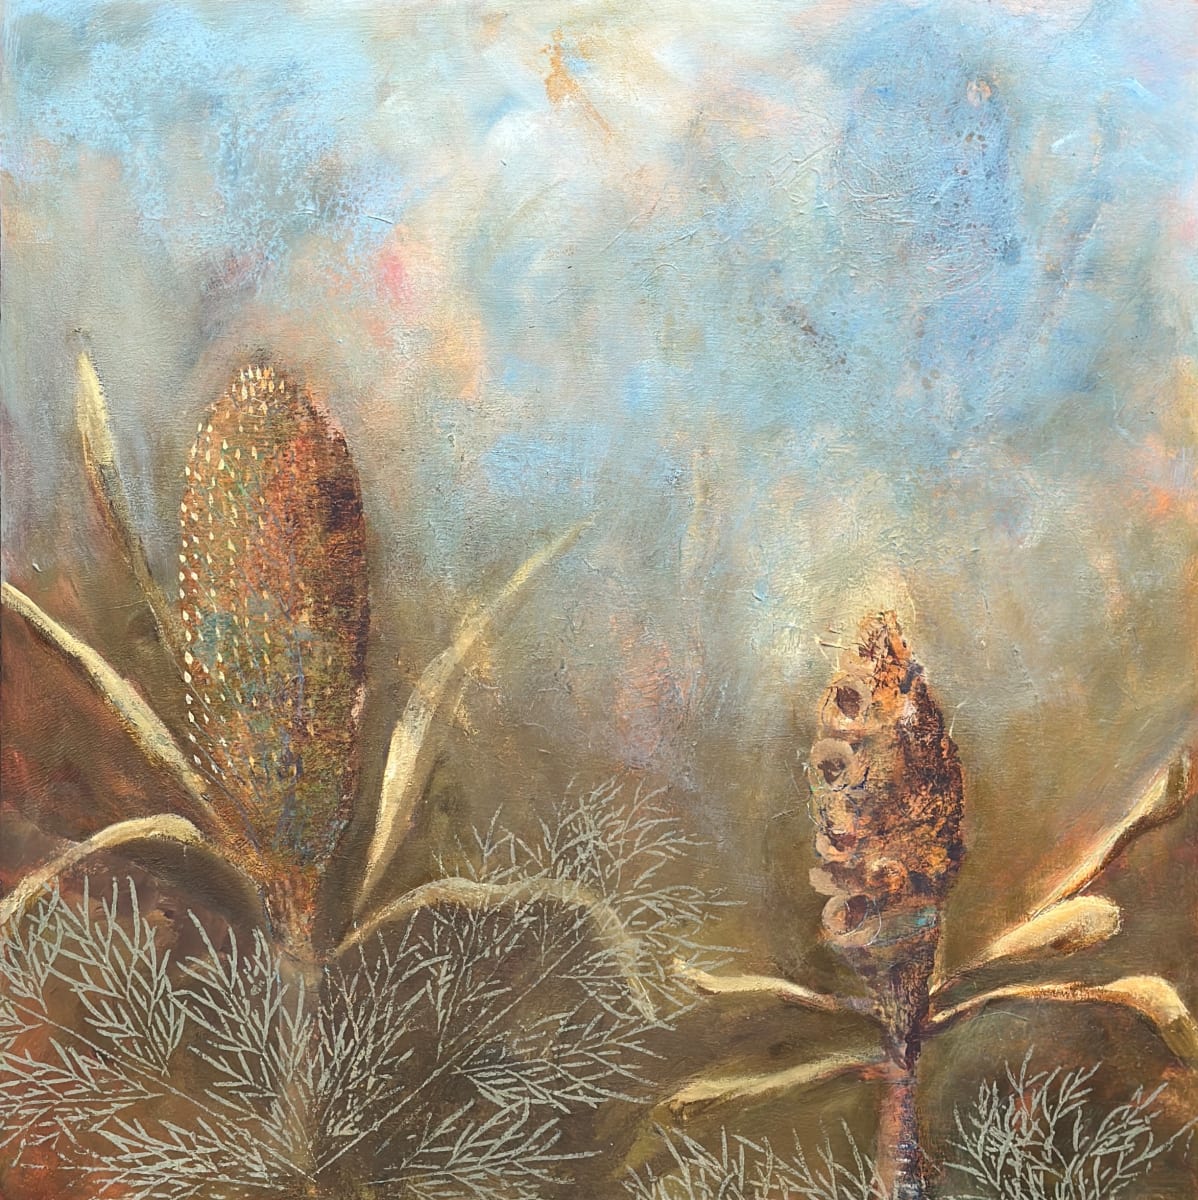 The Majestic Banksia by Trudy Rice  Image: Majestic Banksia